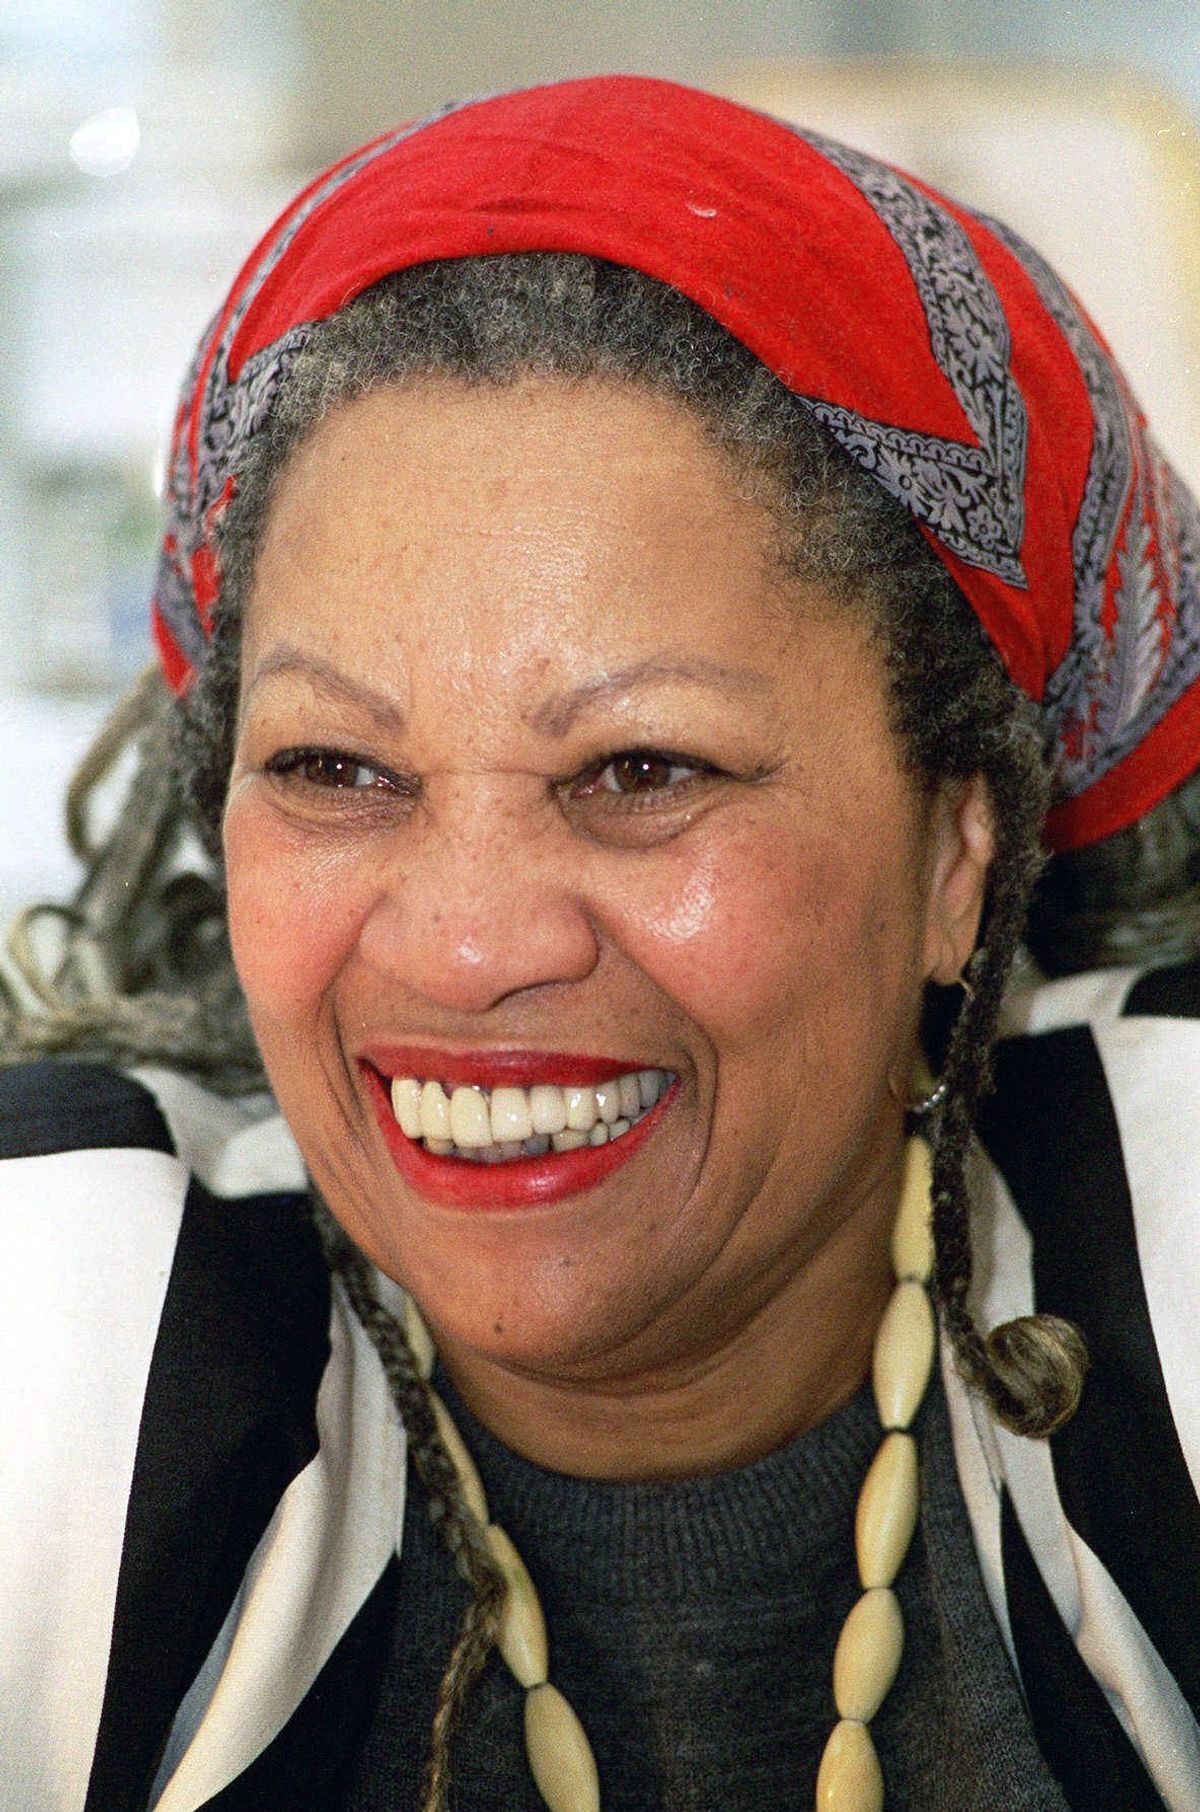 FILE - In this Jan. 27, 1993 file photo, American author Toni Morrison is shown at Princeton University in Princeton, New Jersey. Her novels, such as 1987's "Beloved," have shone a light on the racial prejudices that have afflicted her homeland. (AP Photo/Charles Rex Arbogast, File) (AP)